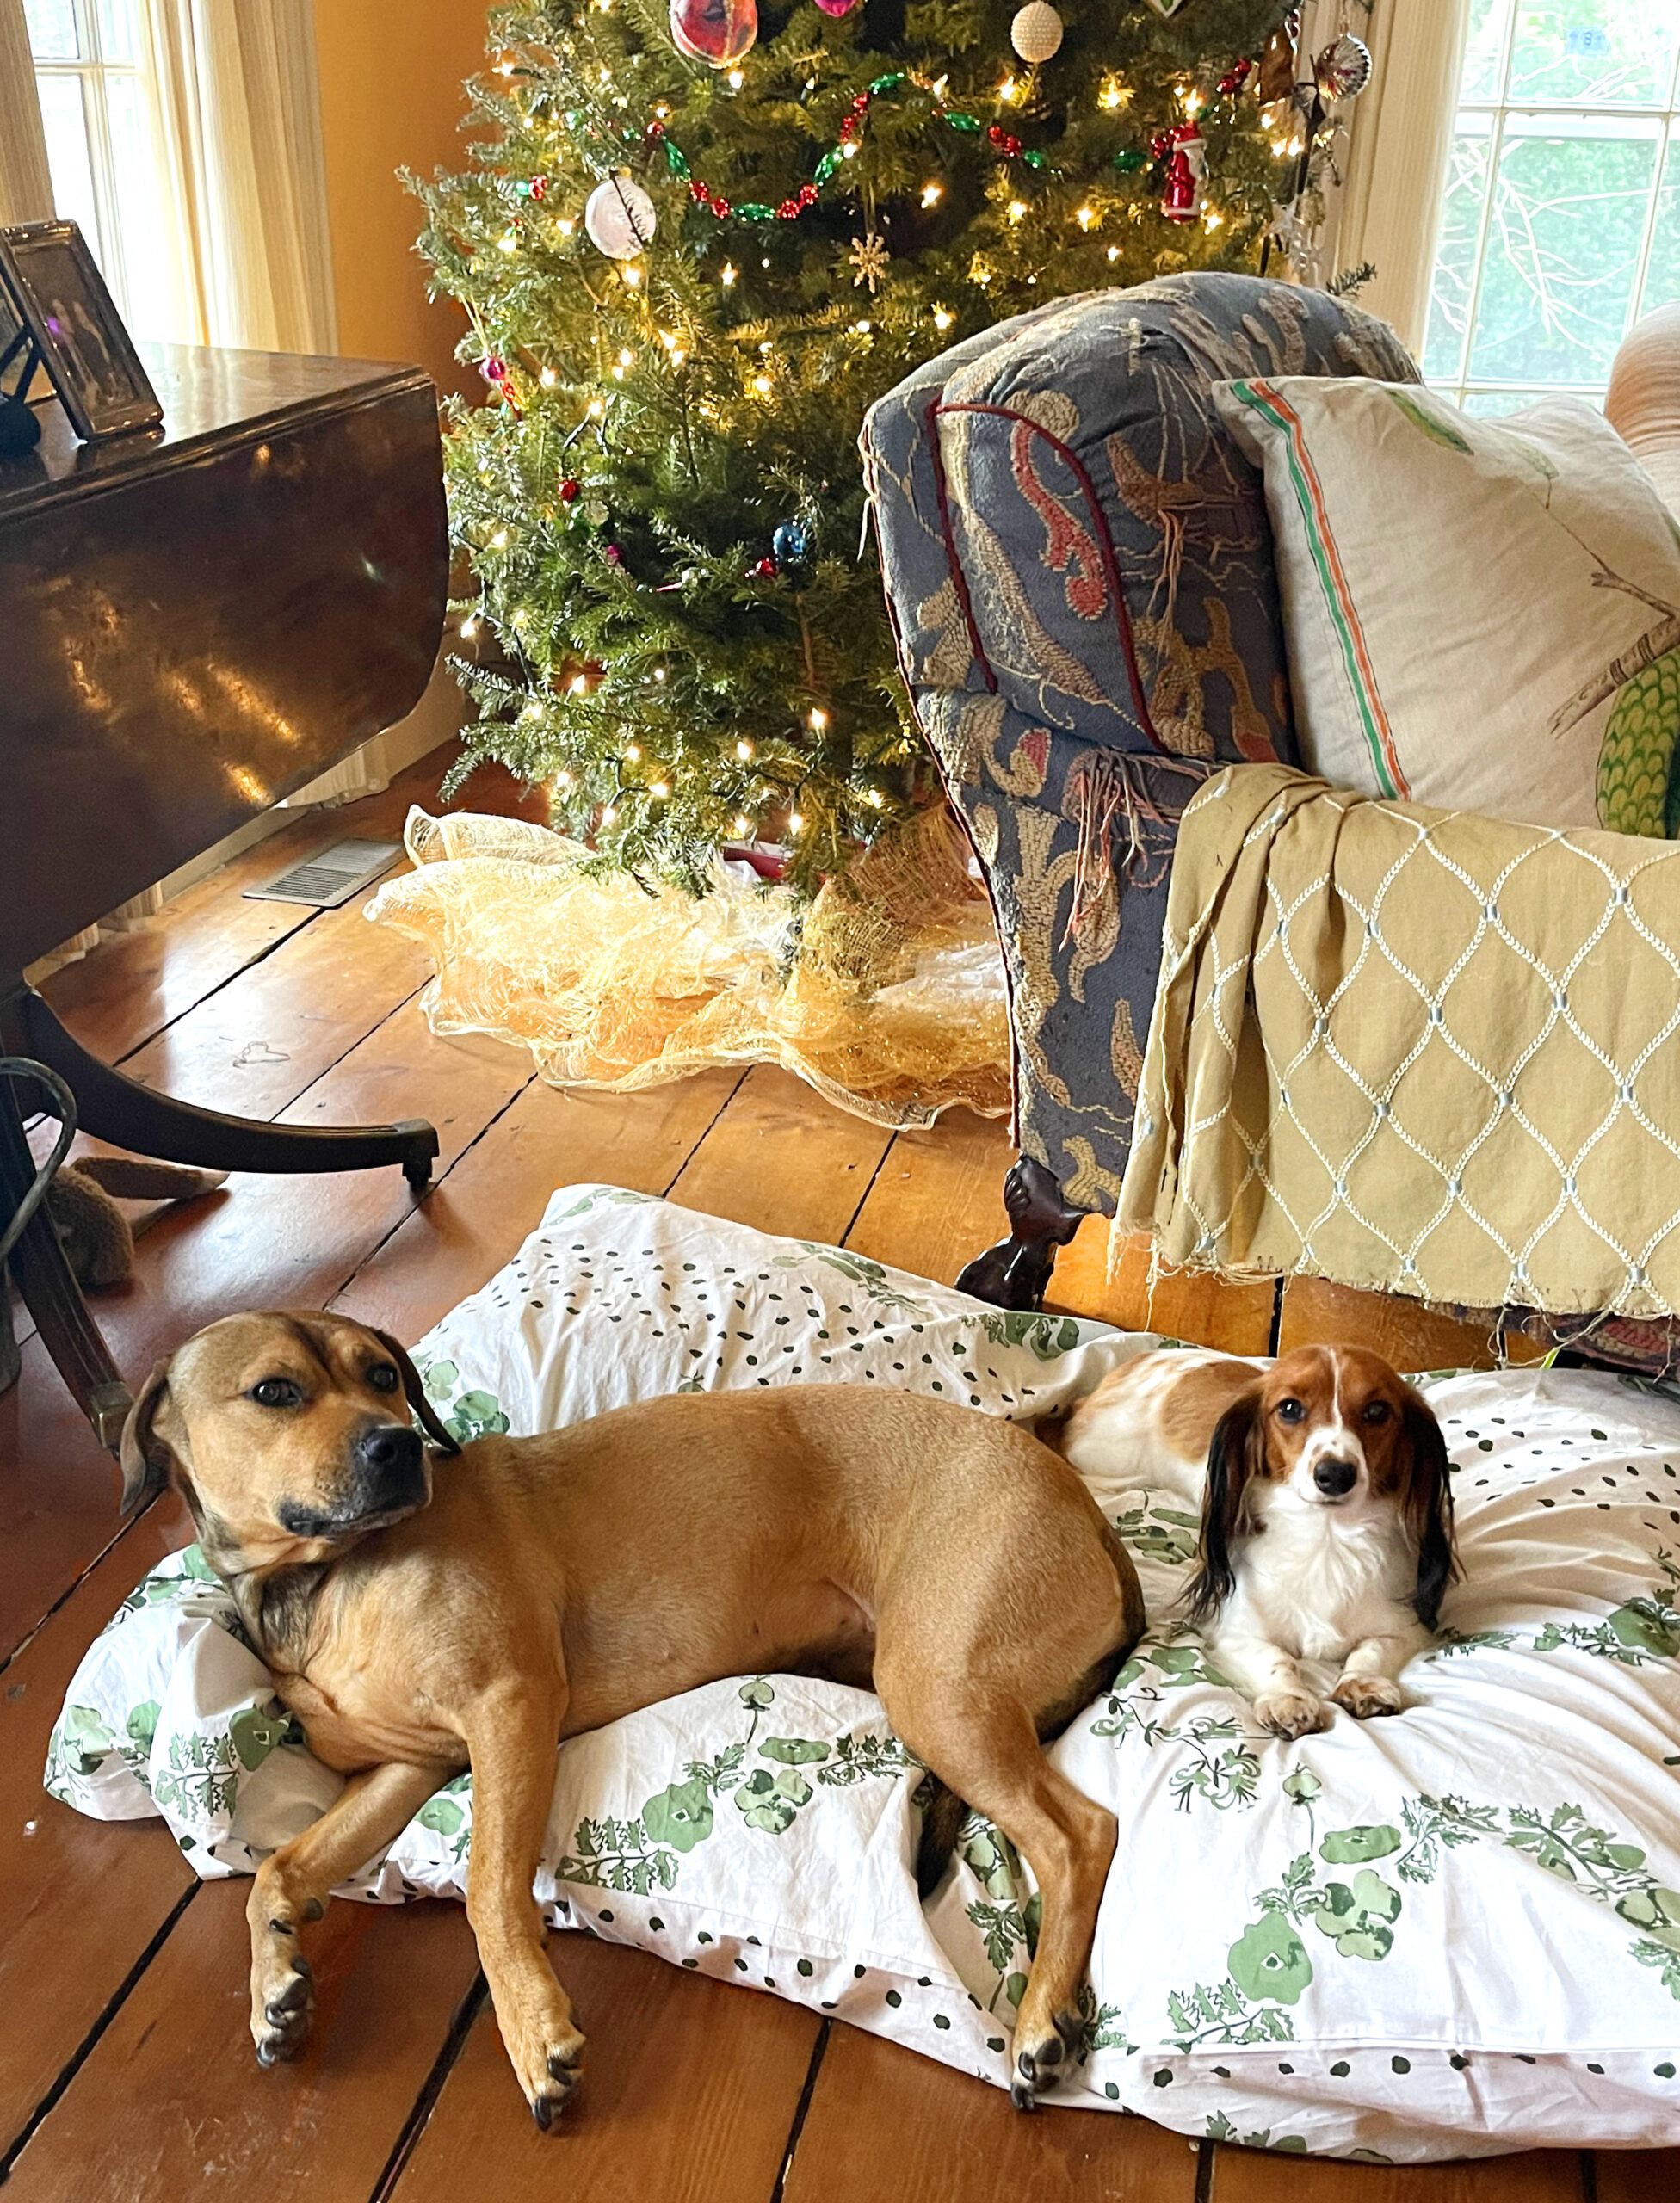 One large brown dog and one small white and brown dog sitting on a chintz dog bed next to a tattered blue tapestry armchair, near a Christmas tree.